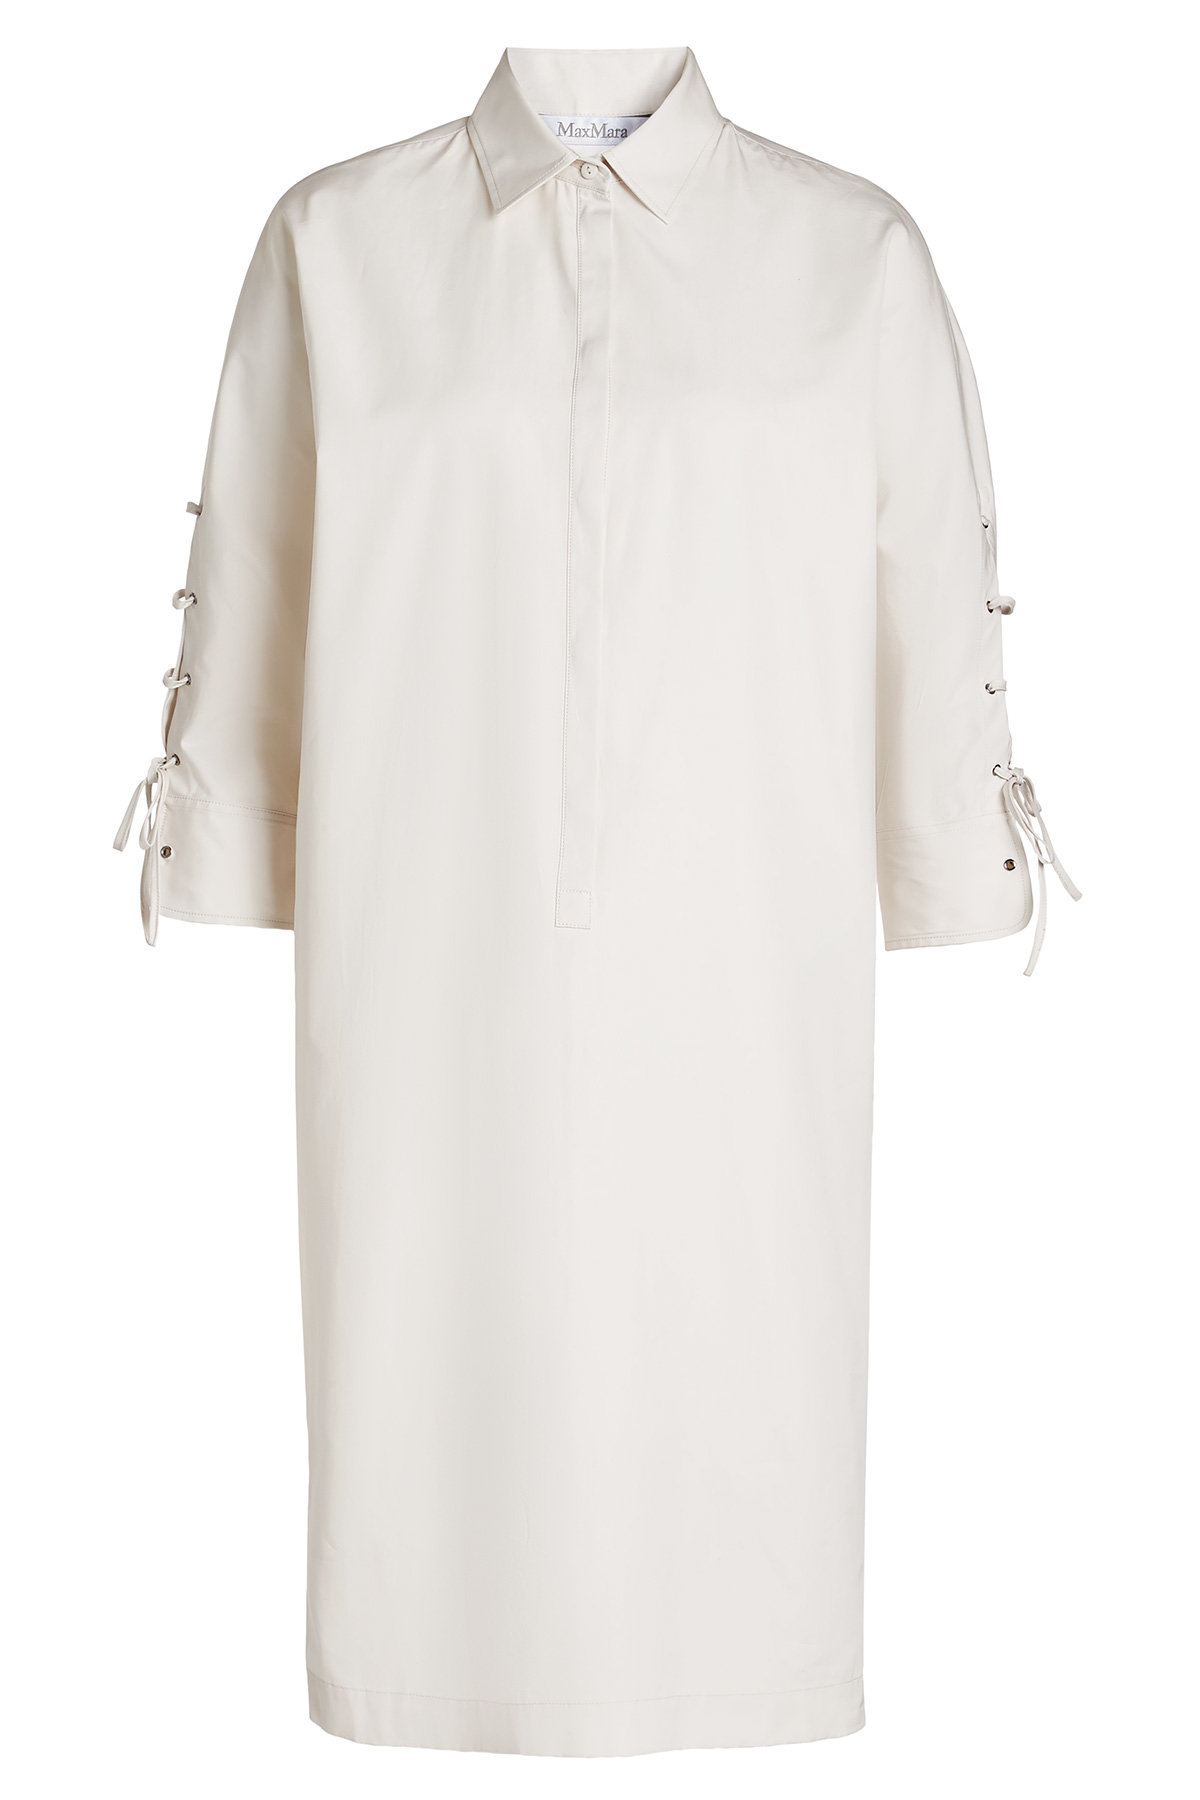 Max Mara - Cotton Dress with Lace-Up Detail